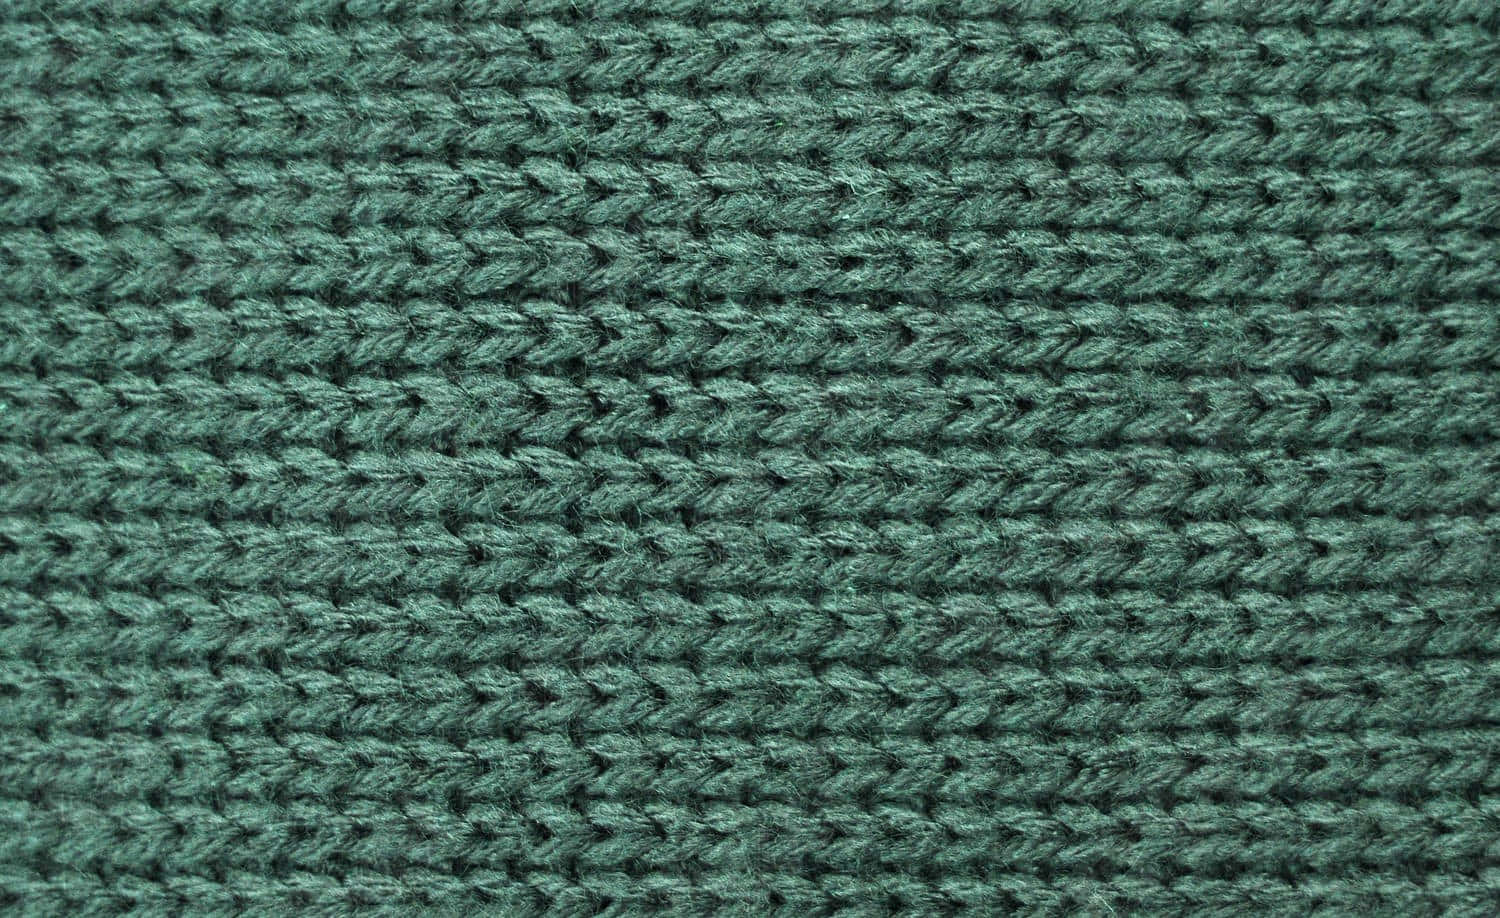 Cozy Knitted Wool Fibers Up Close Wallpaper